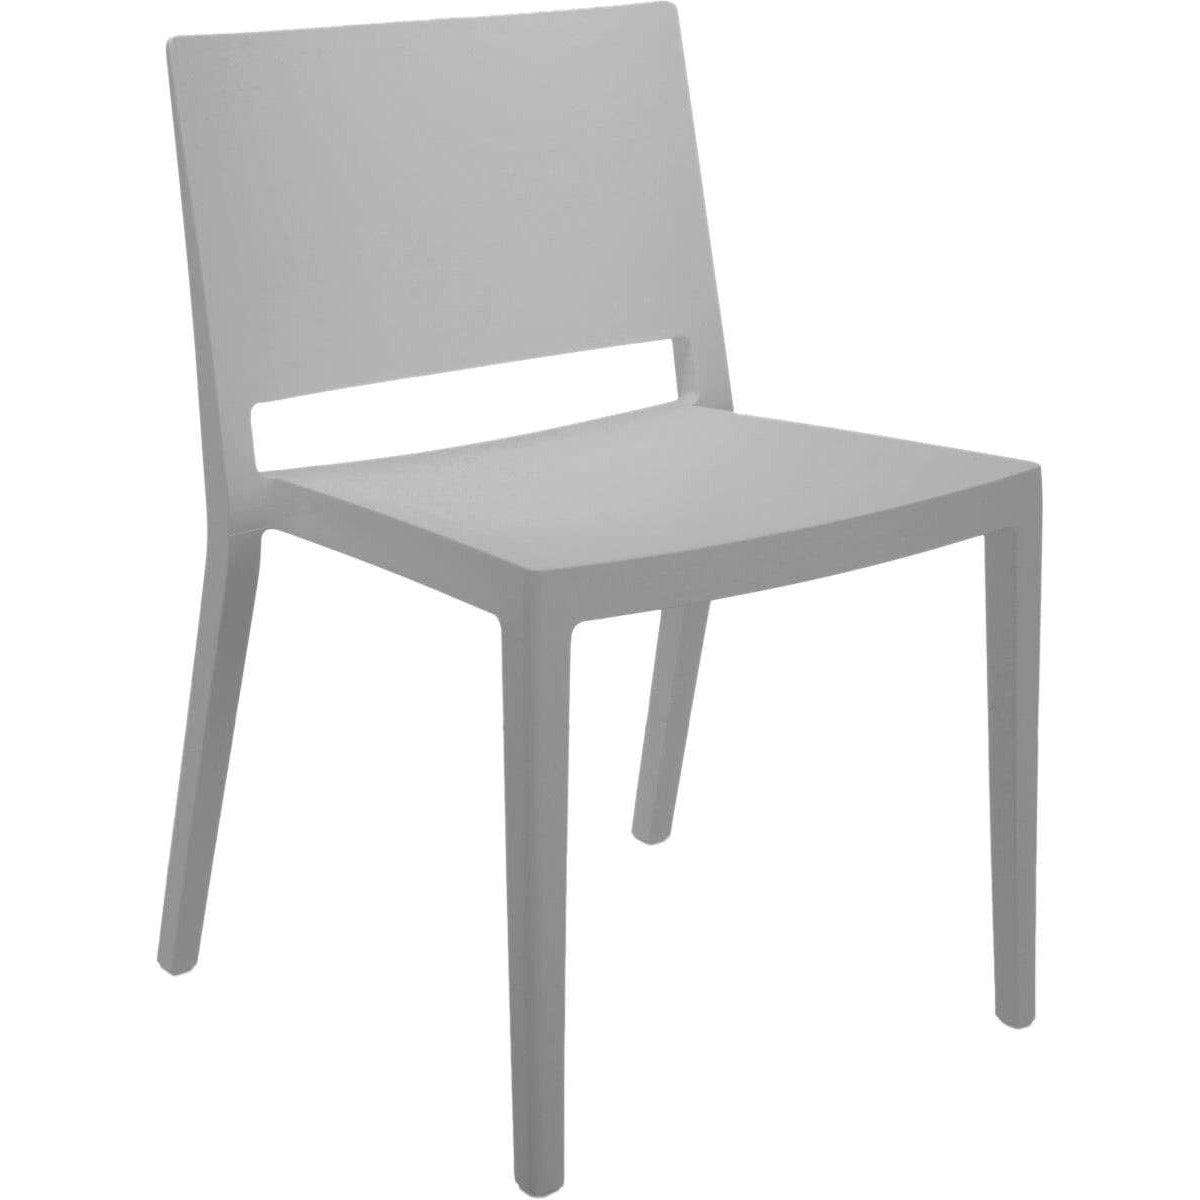 Lizz Mat Chair (Set of 2) - Curated - Furniture - Kartell